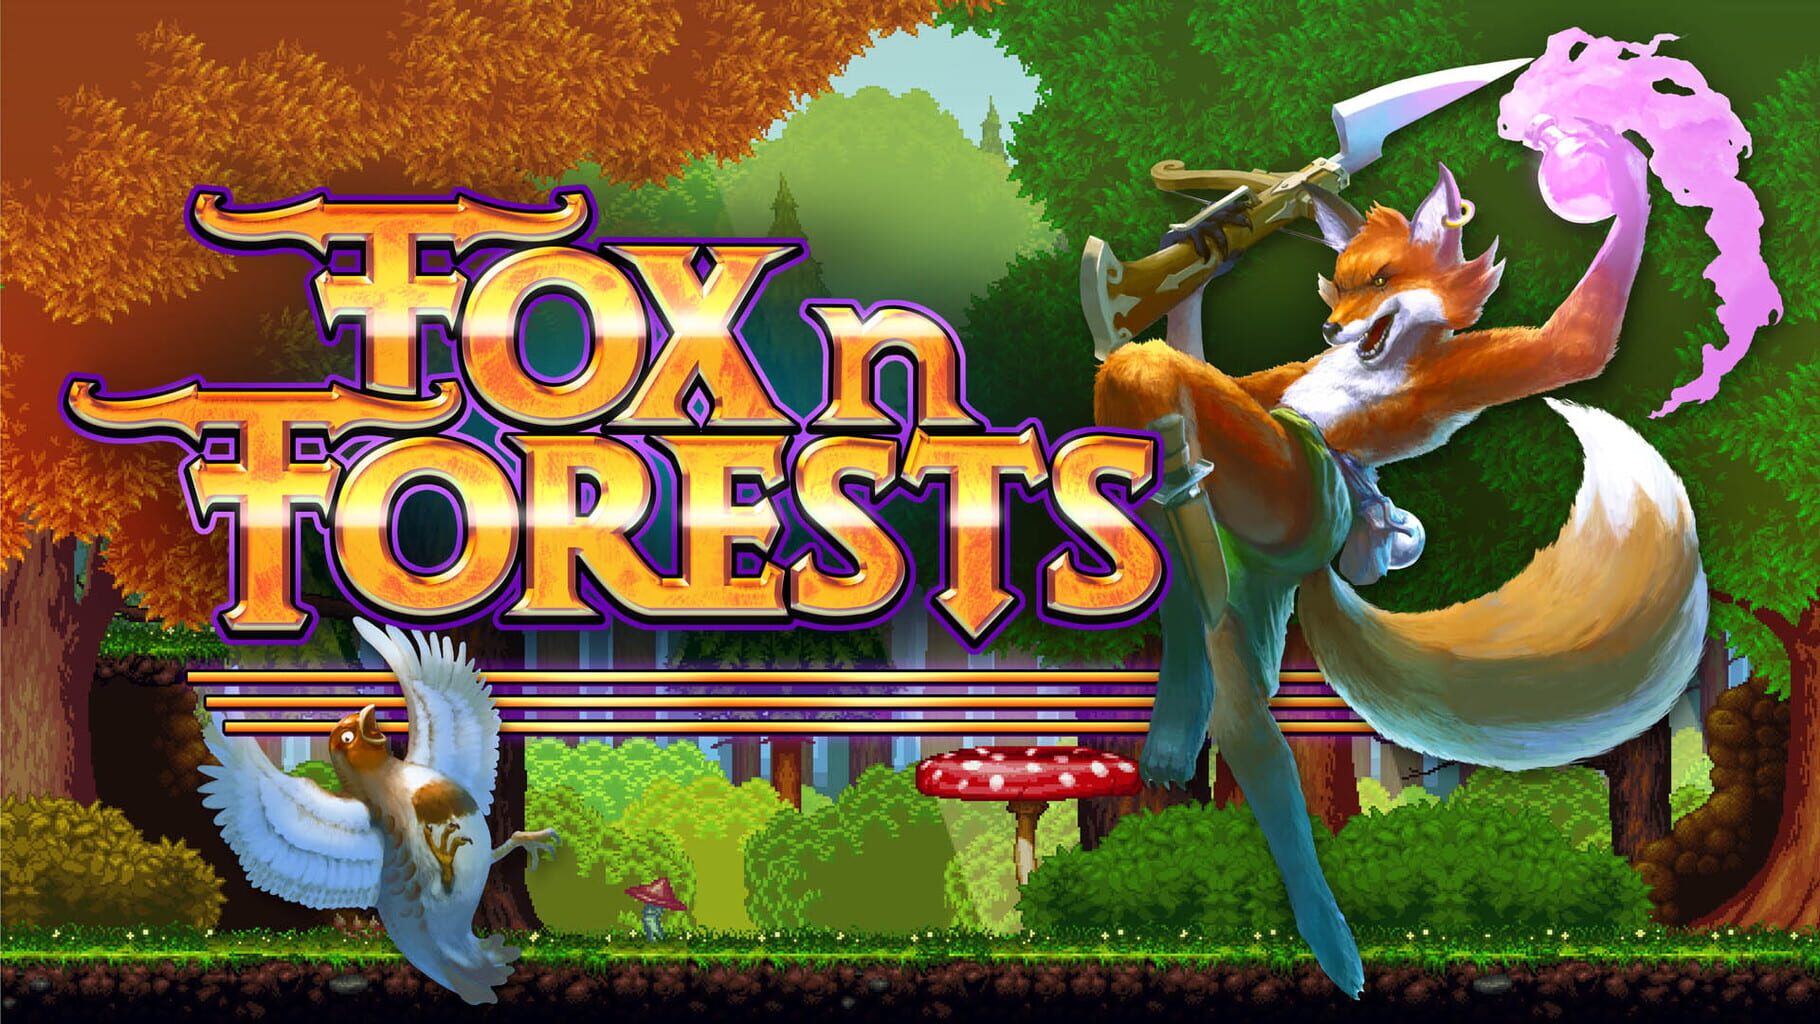 Artwork for Fox n Forests